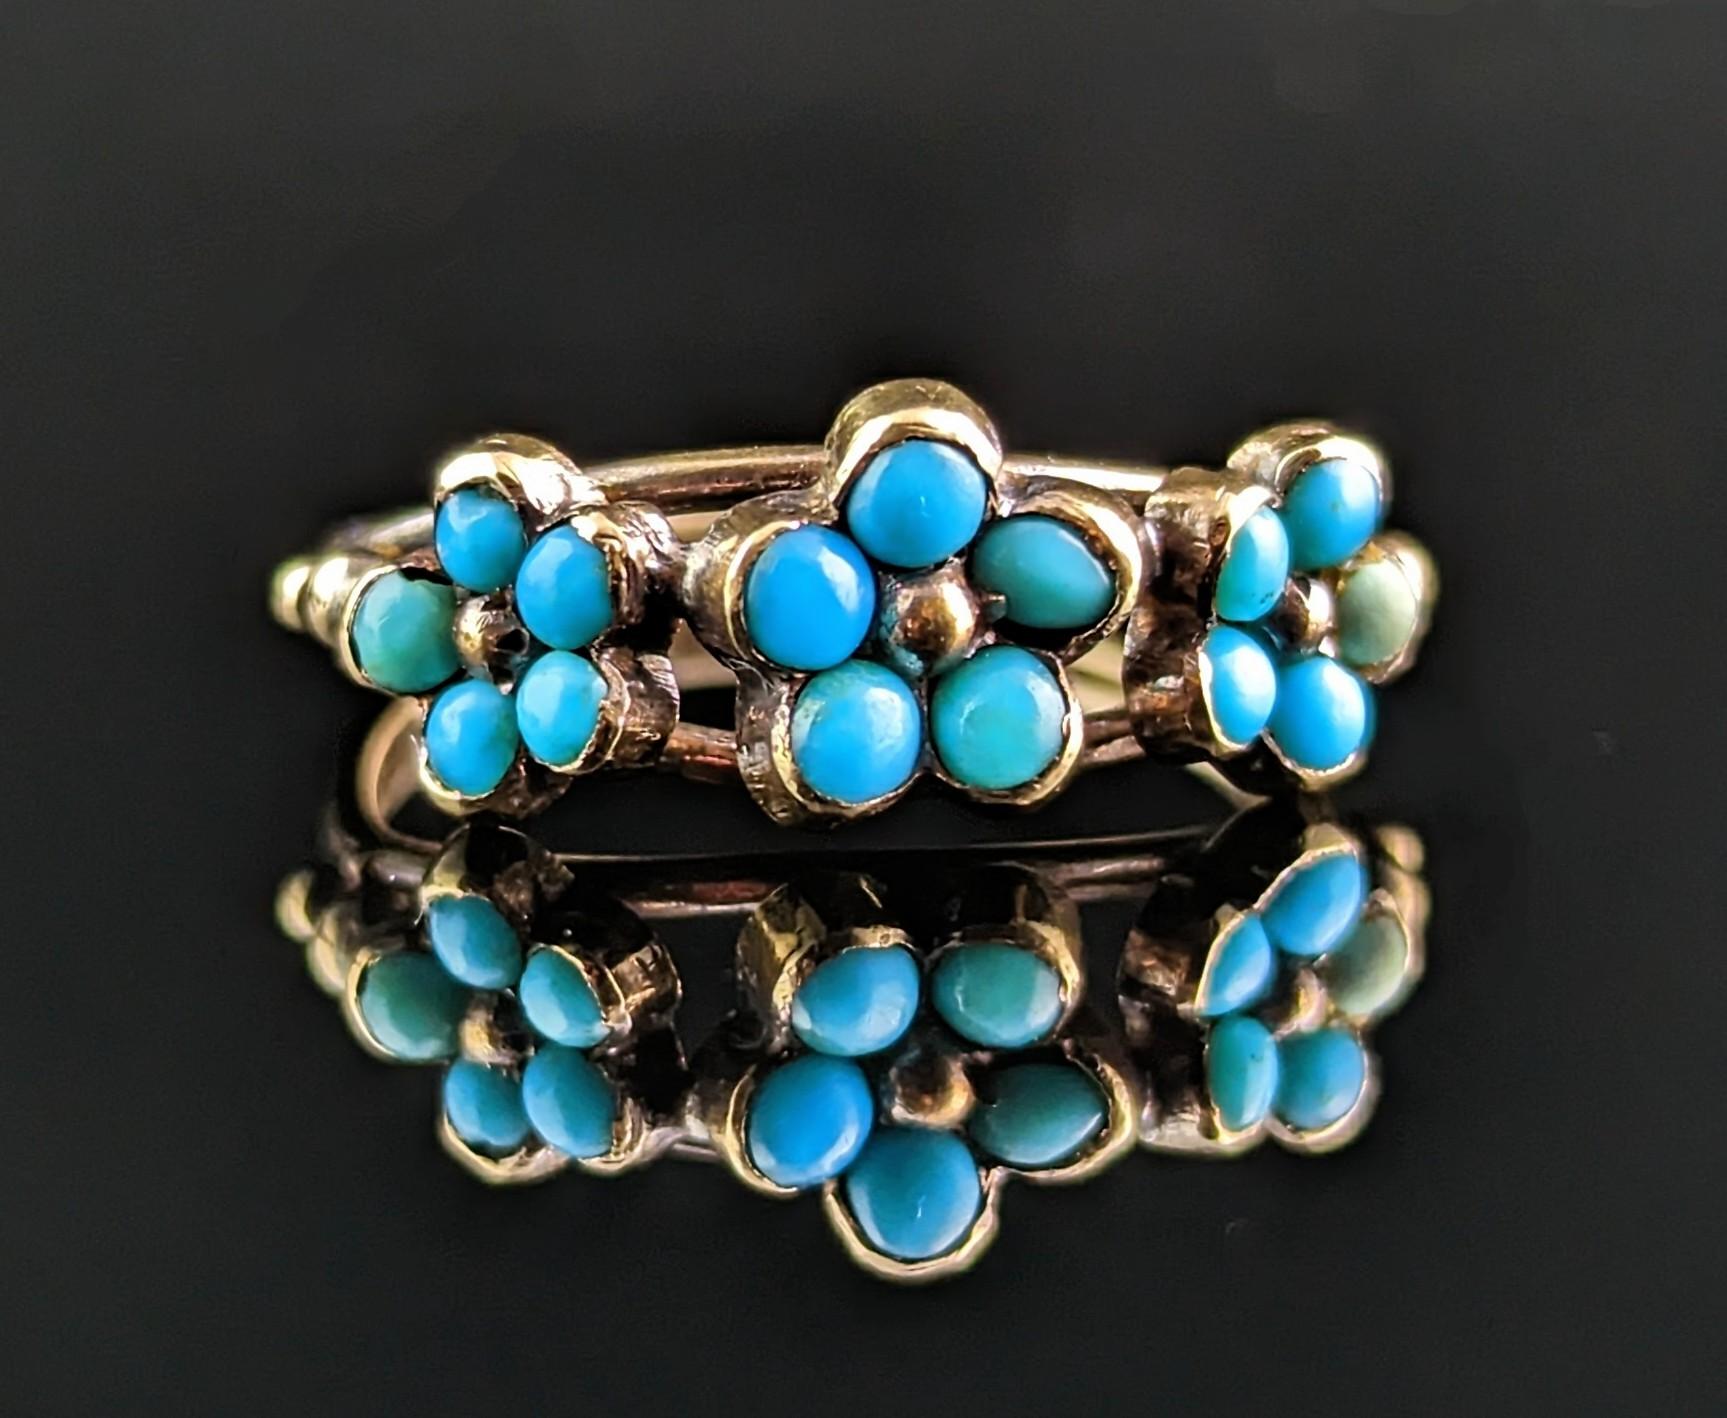 Antique Georgian Triple Flower Ring, Forget Me Not, 18k Gold and Turquoise 2